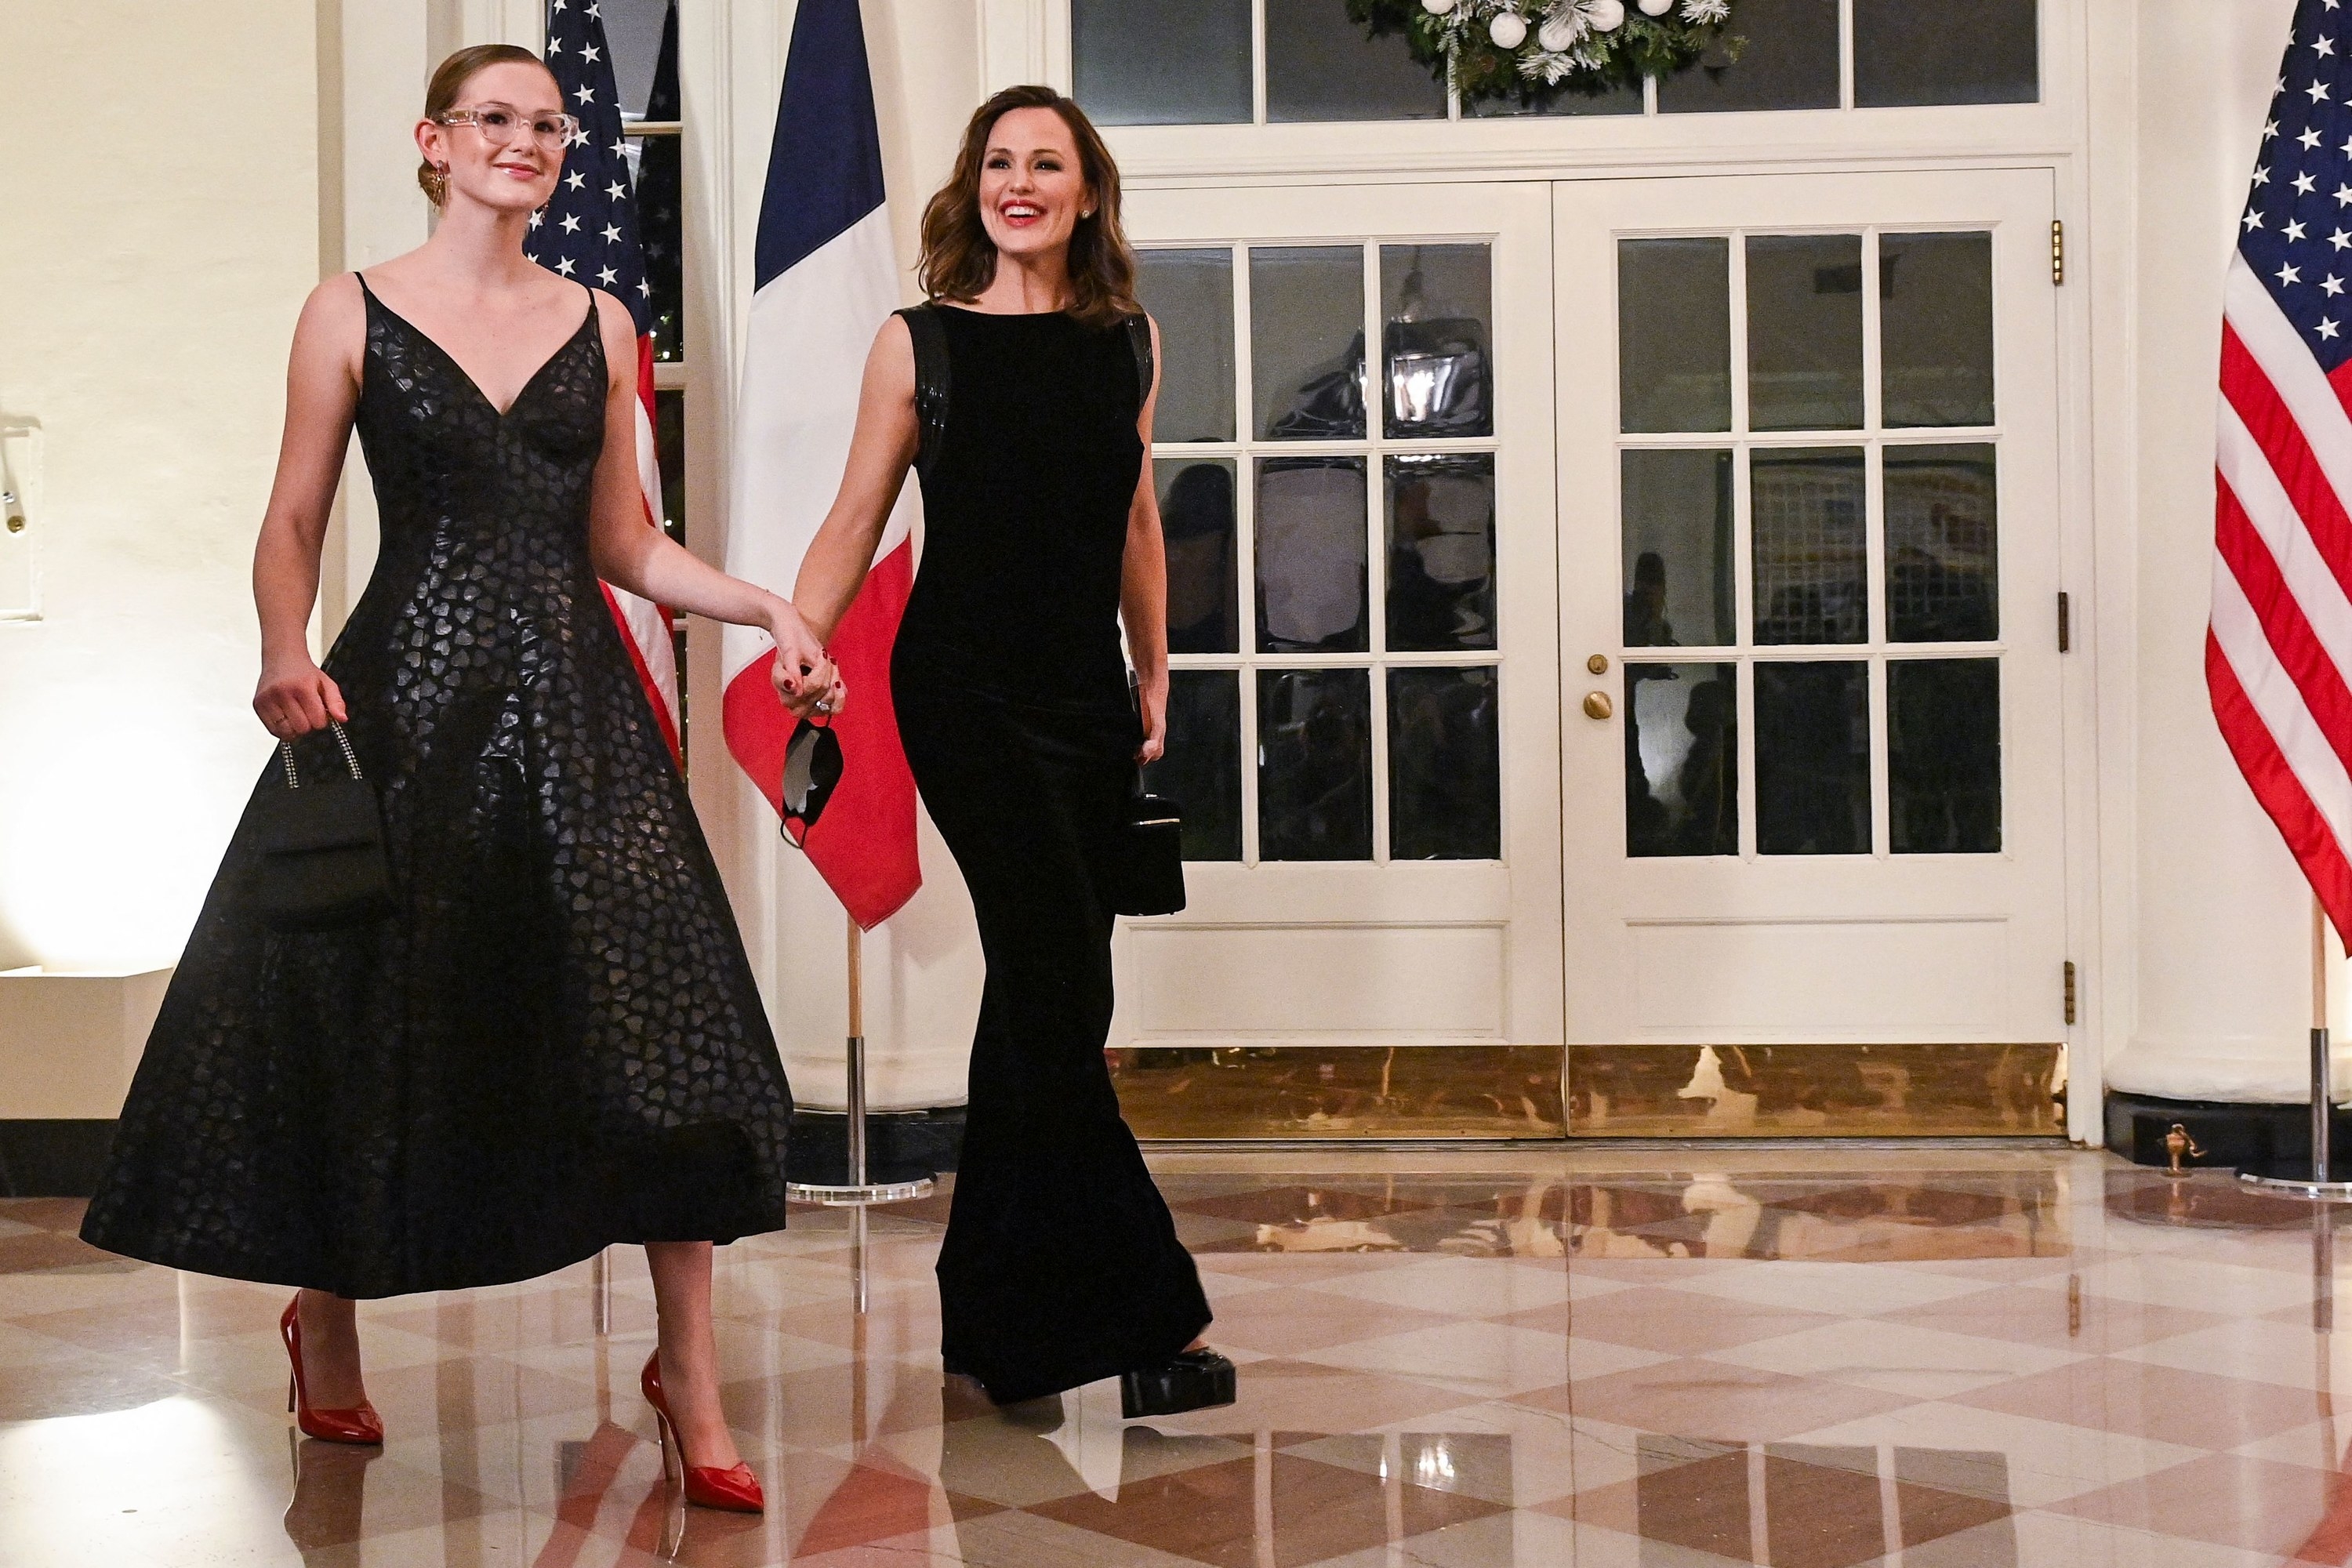 Violet and Jennifer holding hands and walking, with the US flag visible